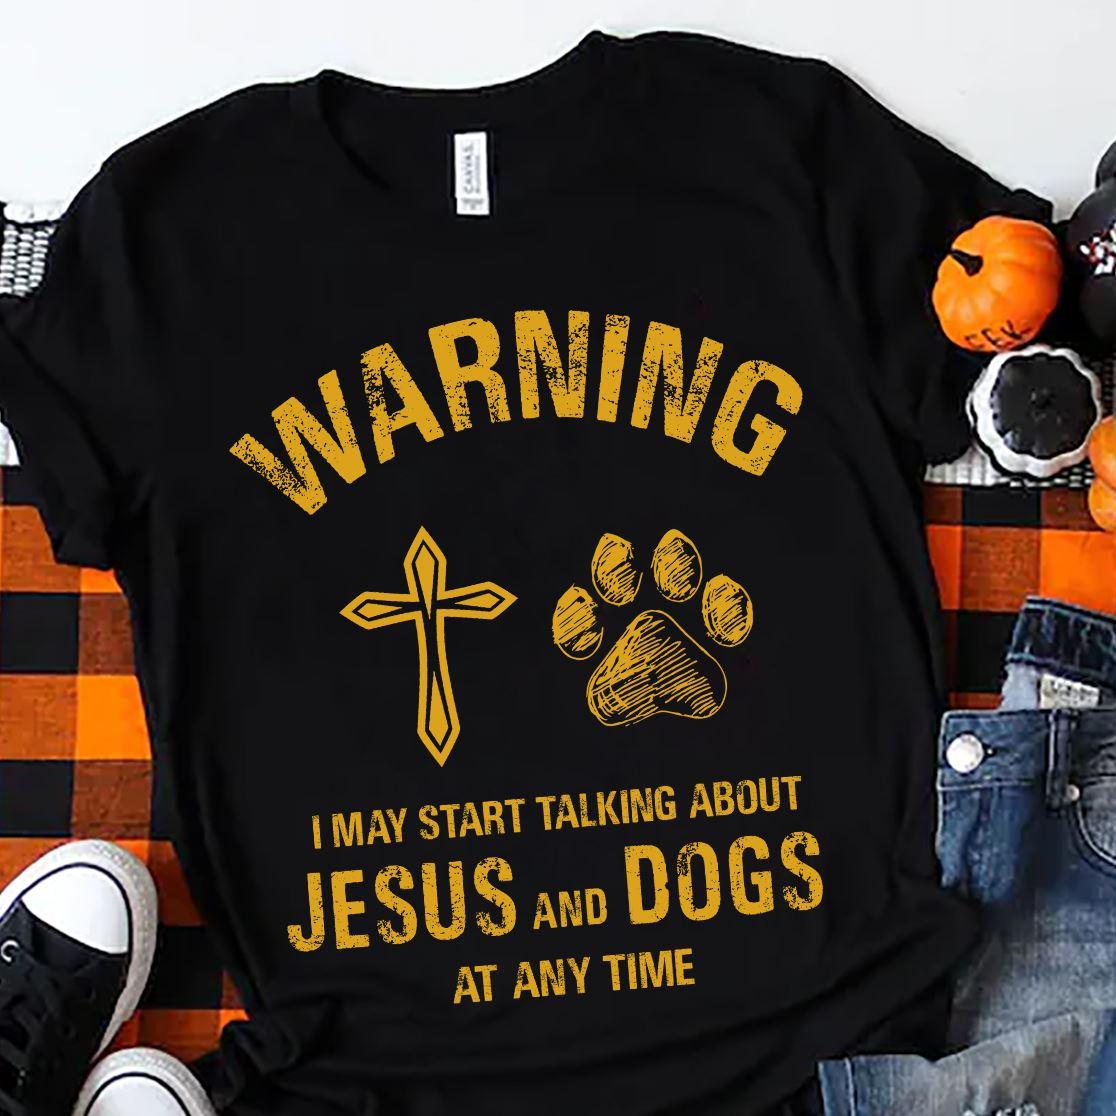 Warning I may start talking about Jesus and Dogs at any time - Believe in Jesus, dog footprint